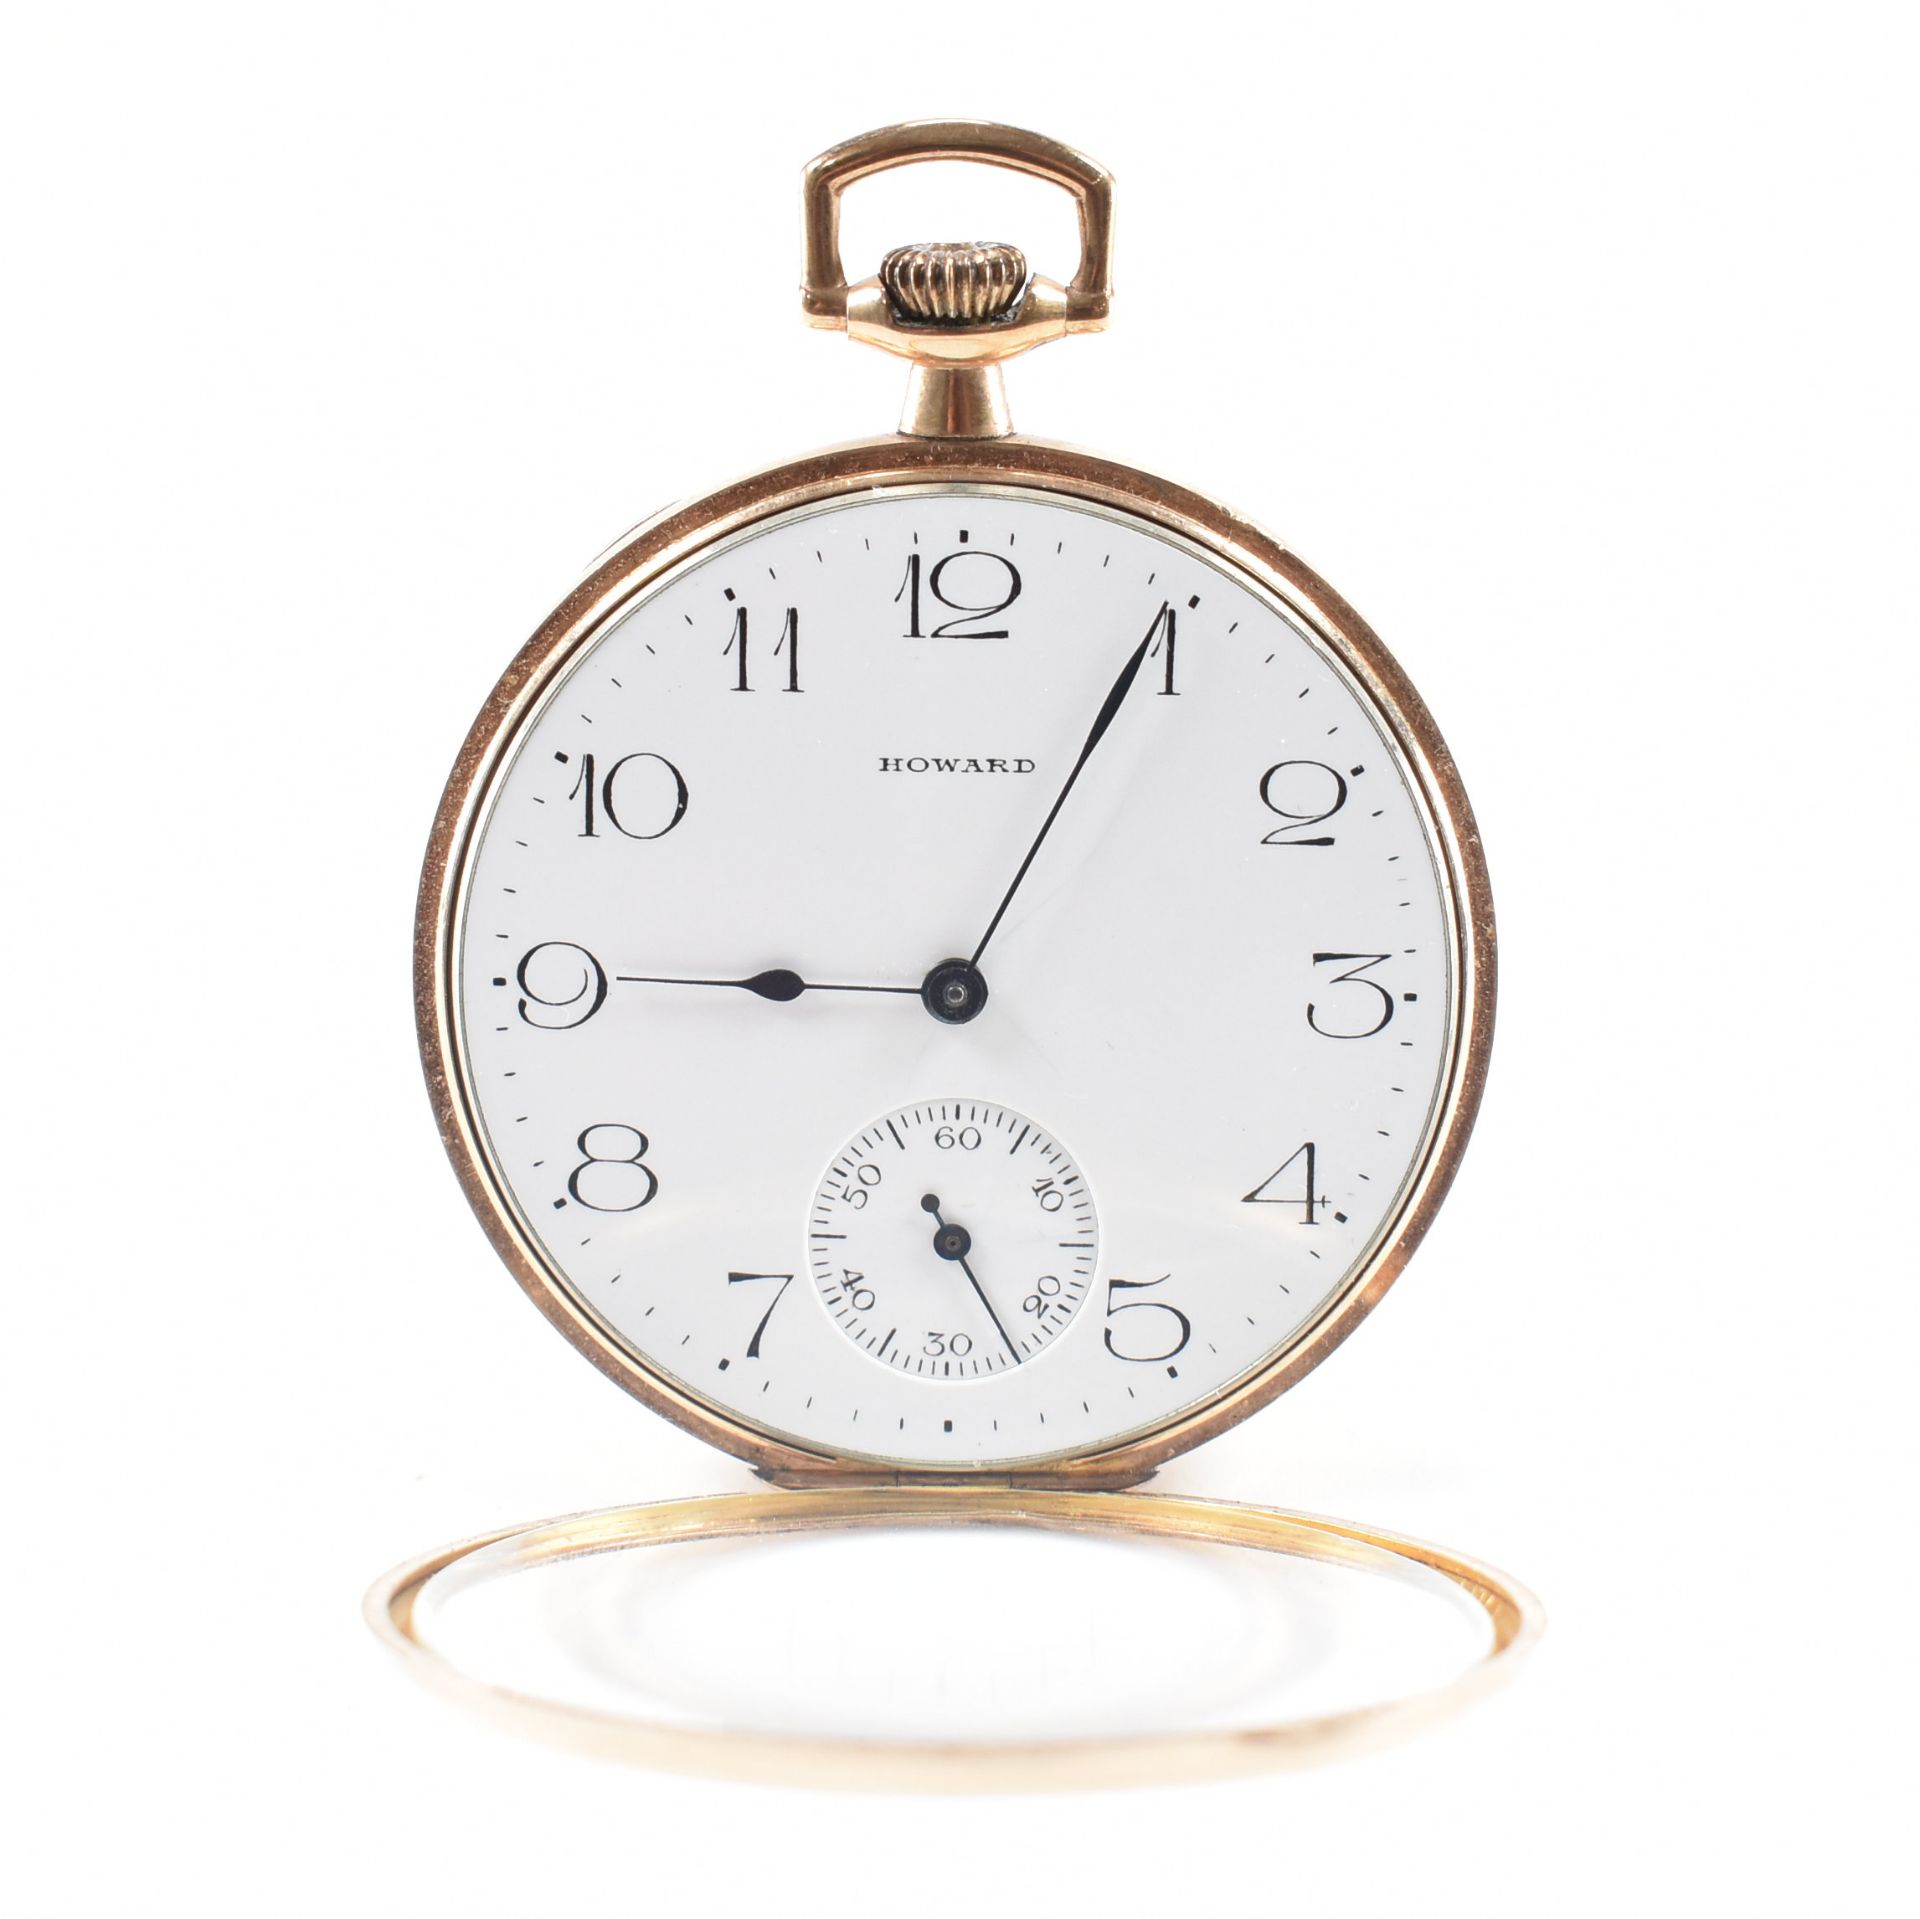 VINTAGE GOLD PLATED OPEN FACE POCKET WATCH - Image 2 of 8